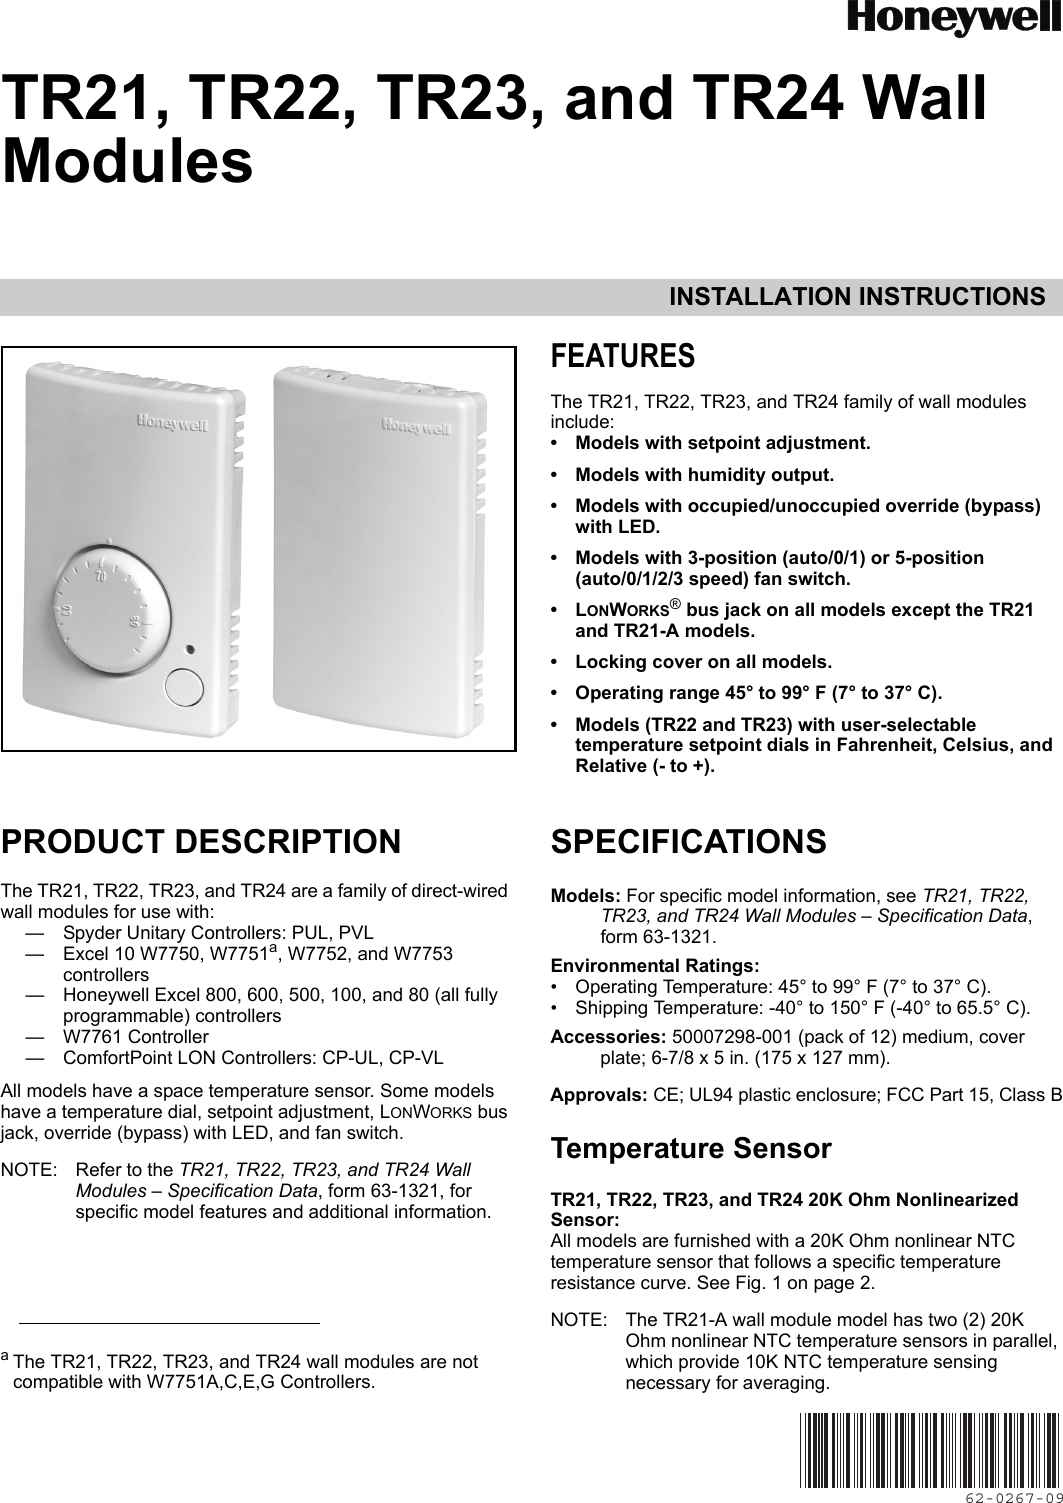 Page 1 of 8 - Honeywell Honeywell-Honeywell-Tv-Mount-Tr21-Users-Manual- 62-0267_E TR21, TR22, TR23, And TR24 Wall Modules  Honeywell-honeywell-tv-mount-tr21-users-manual